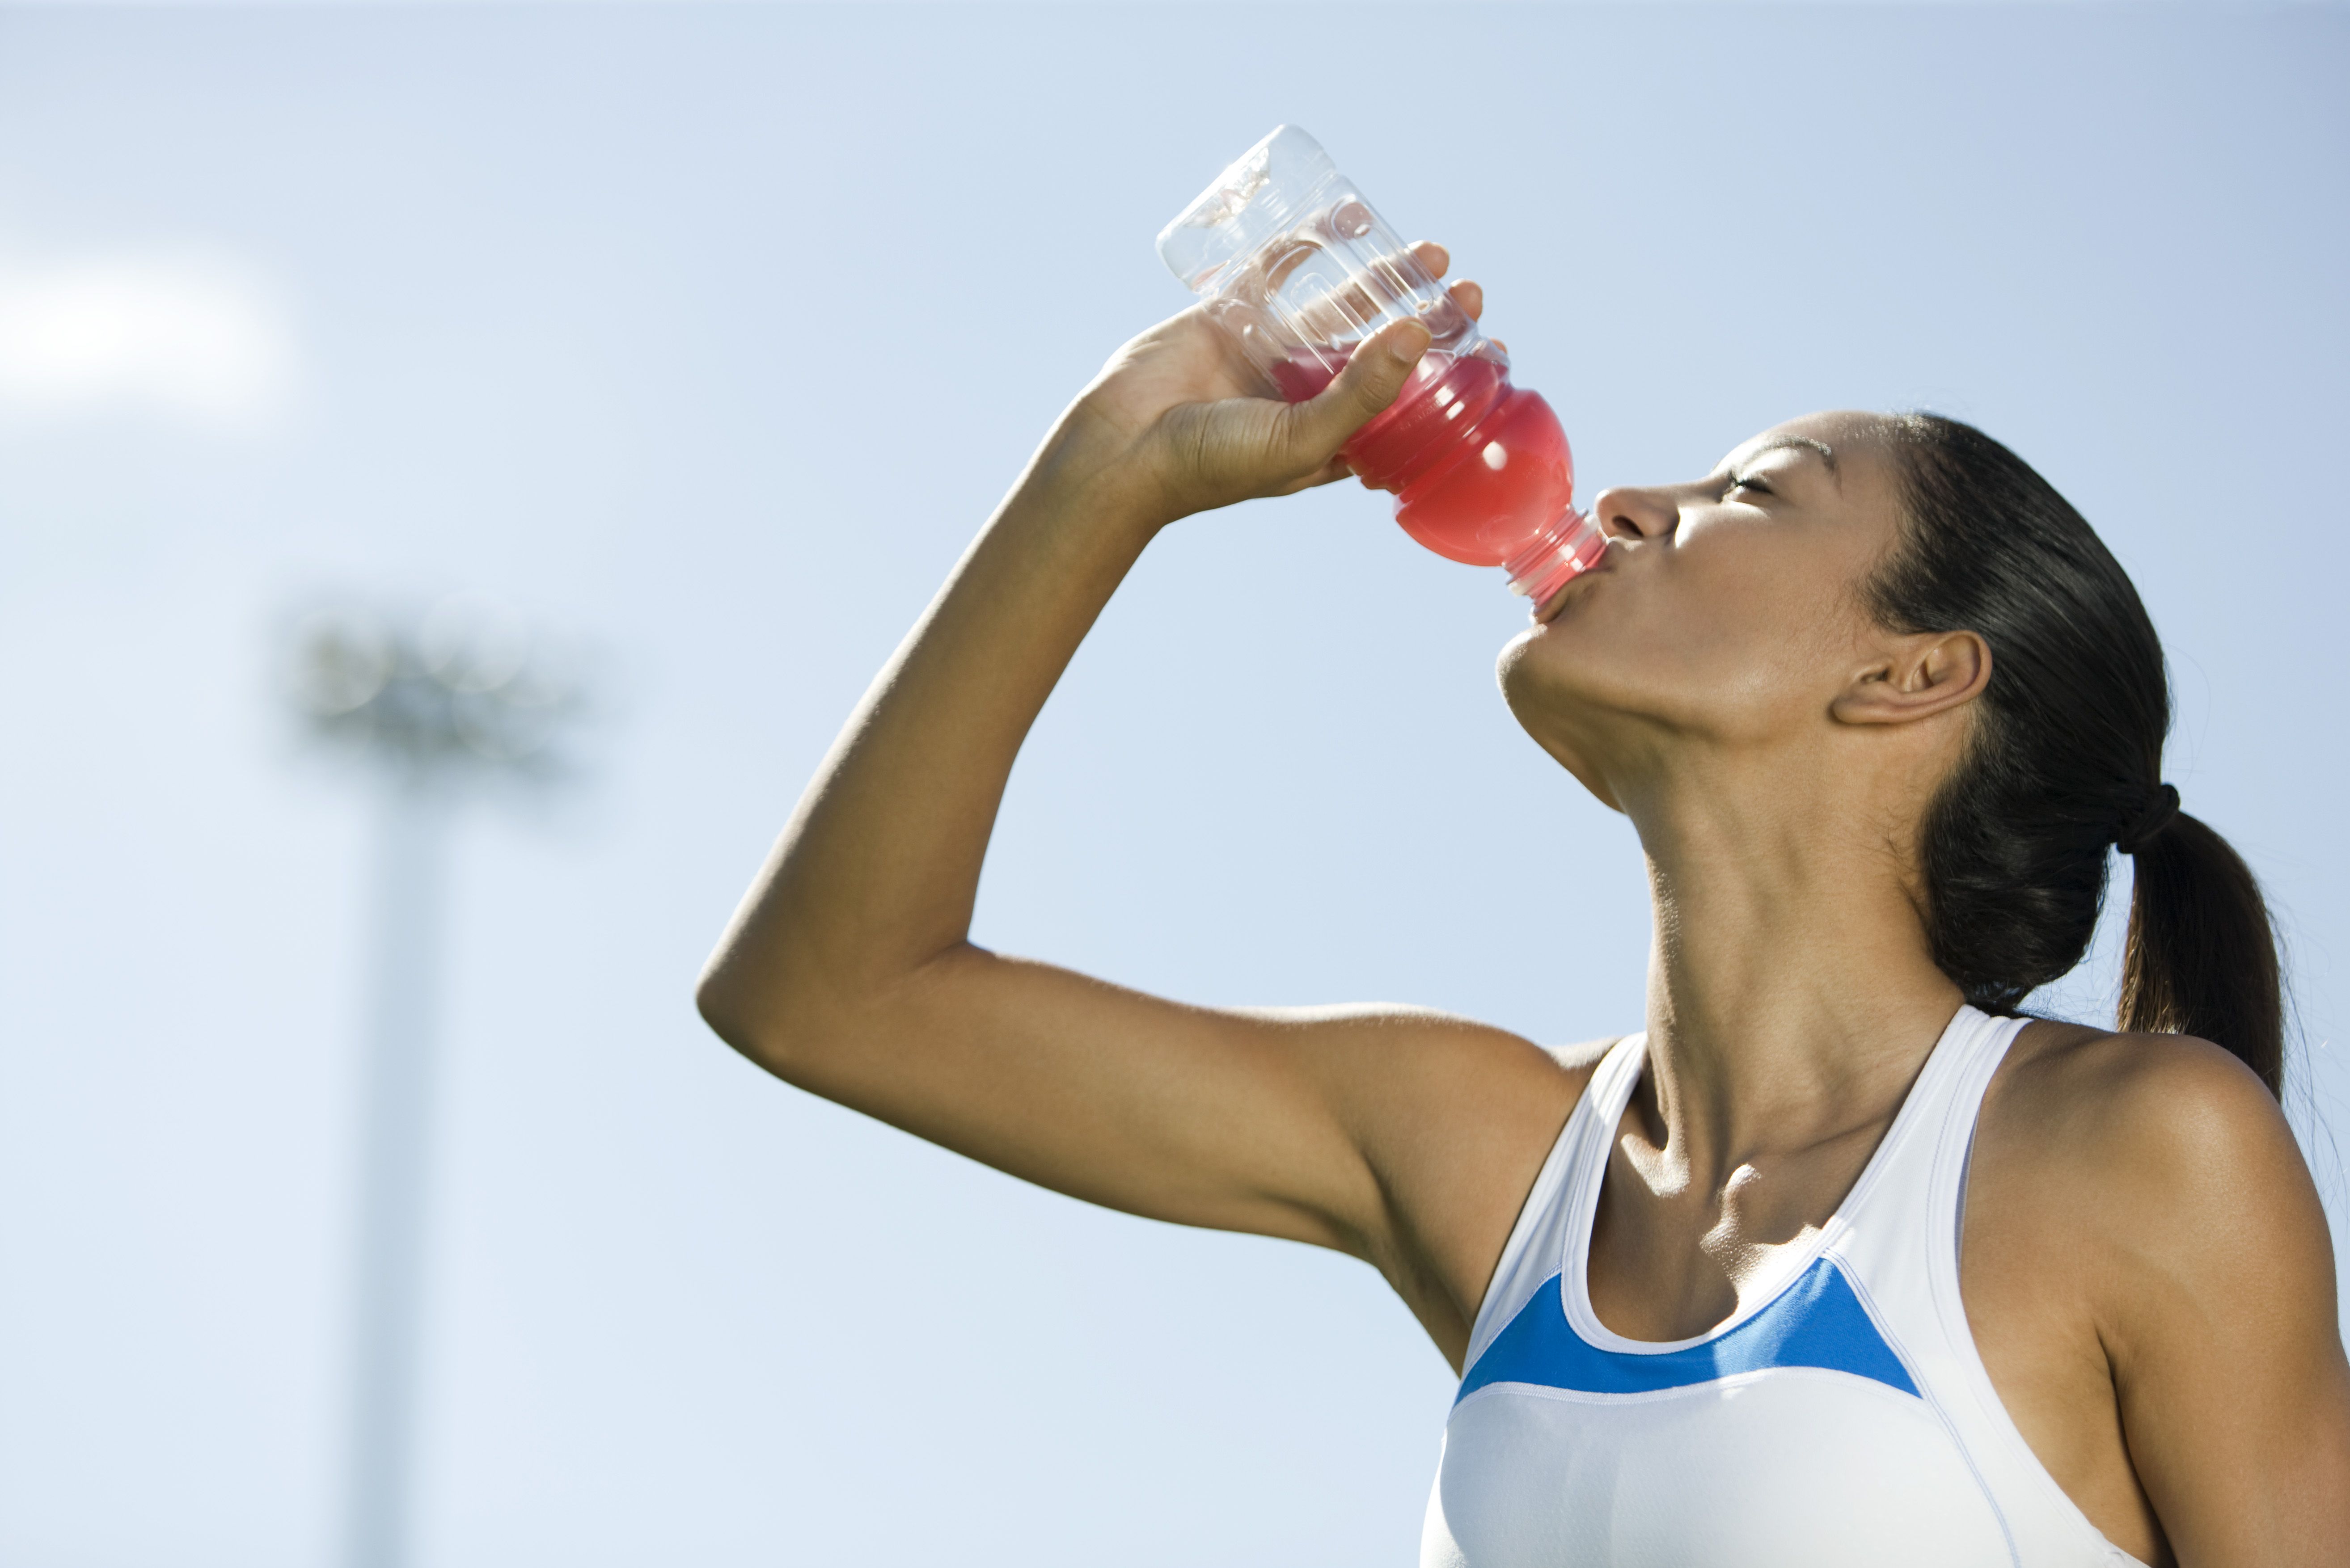 https://hips.hearstapps.com/hmg-prod/images/young-female-athlete-drinking-sports-drink-portrait-royalty-free-image-1684528599.jpg